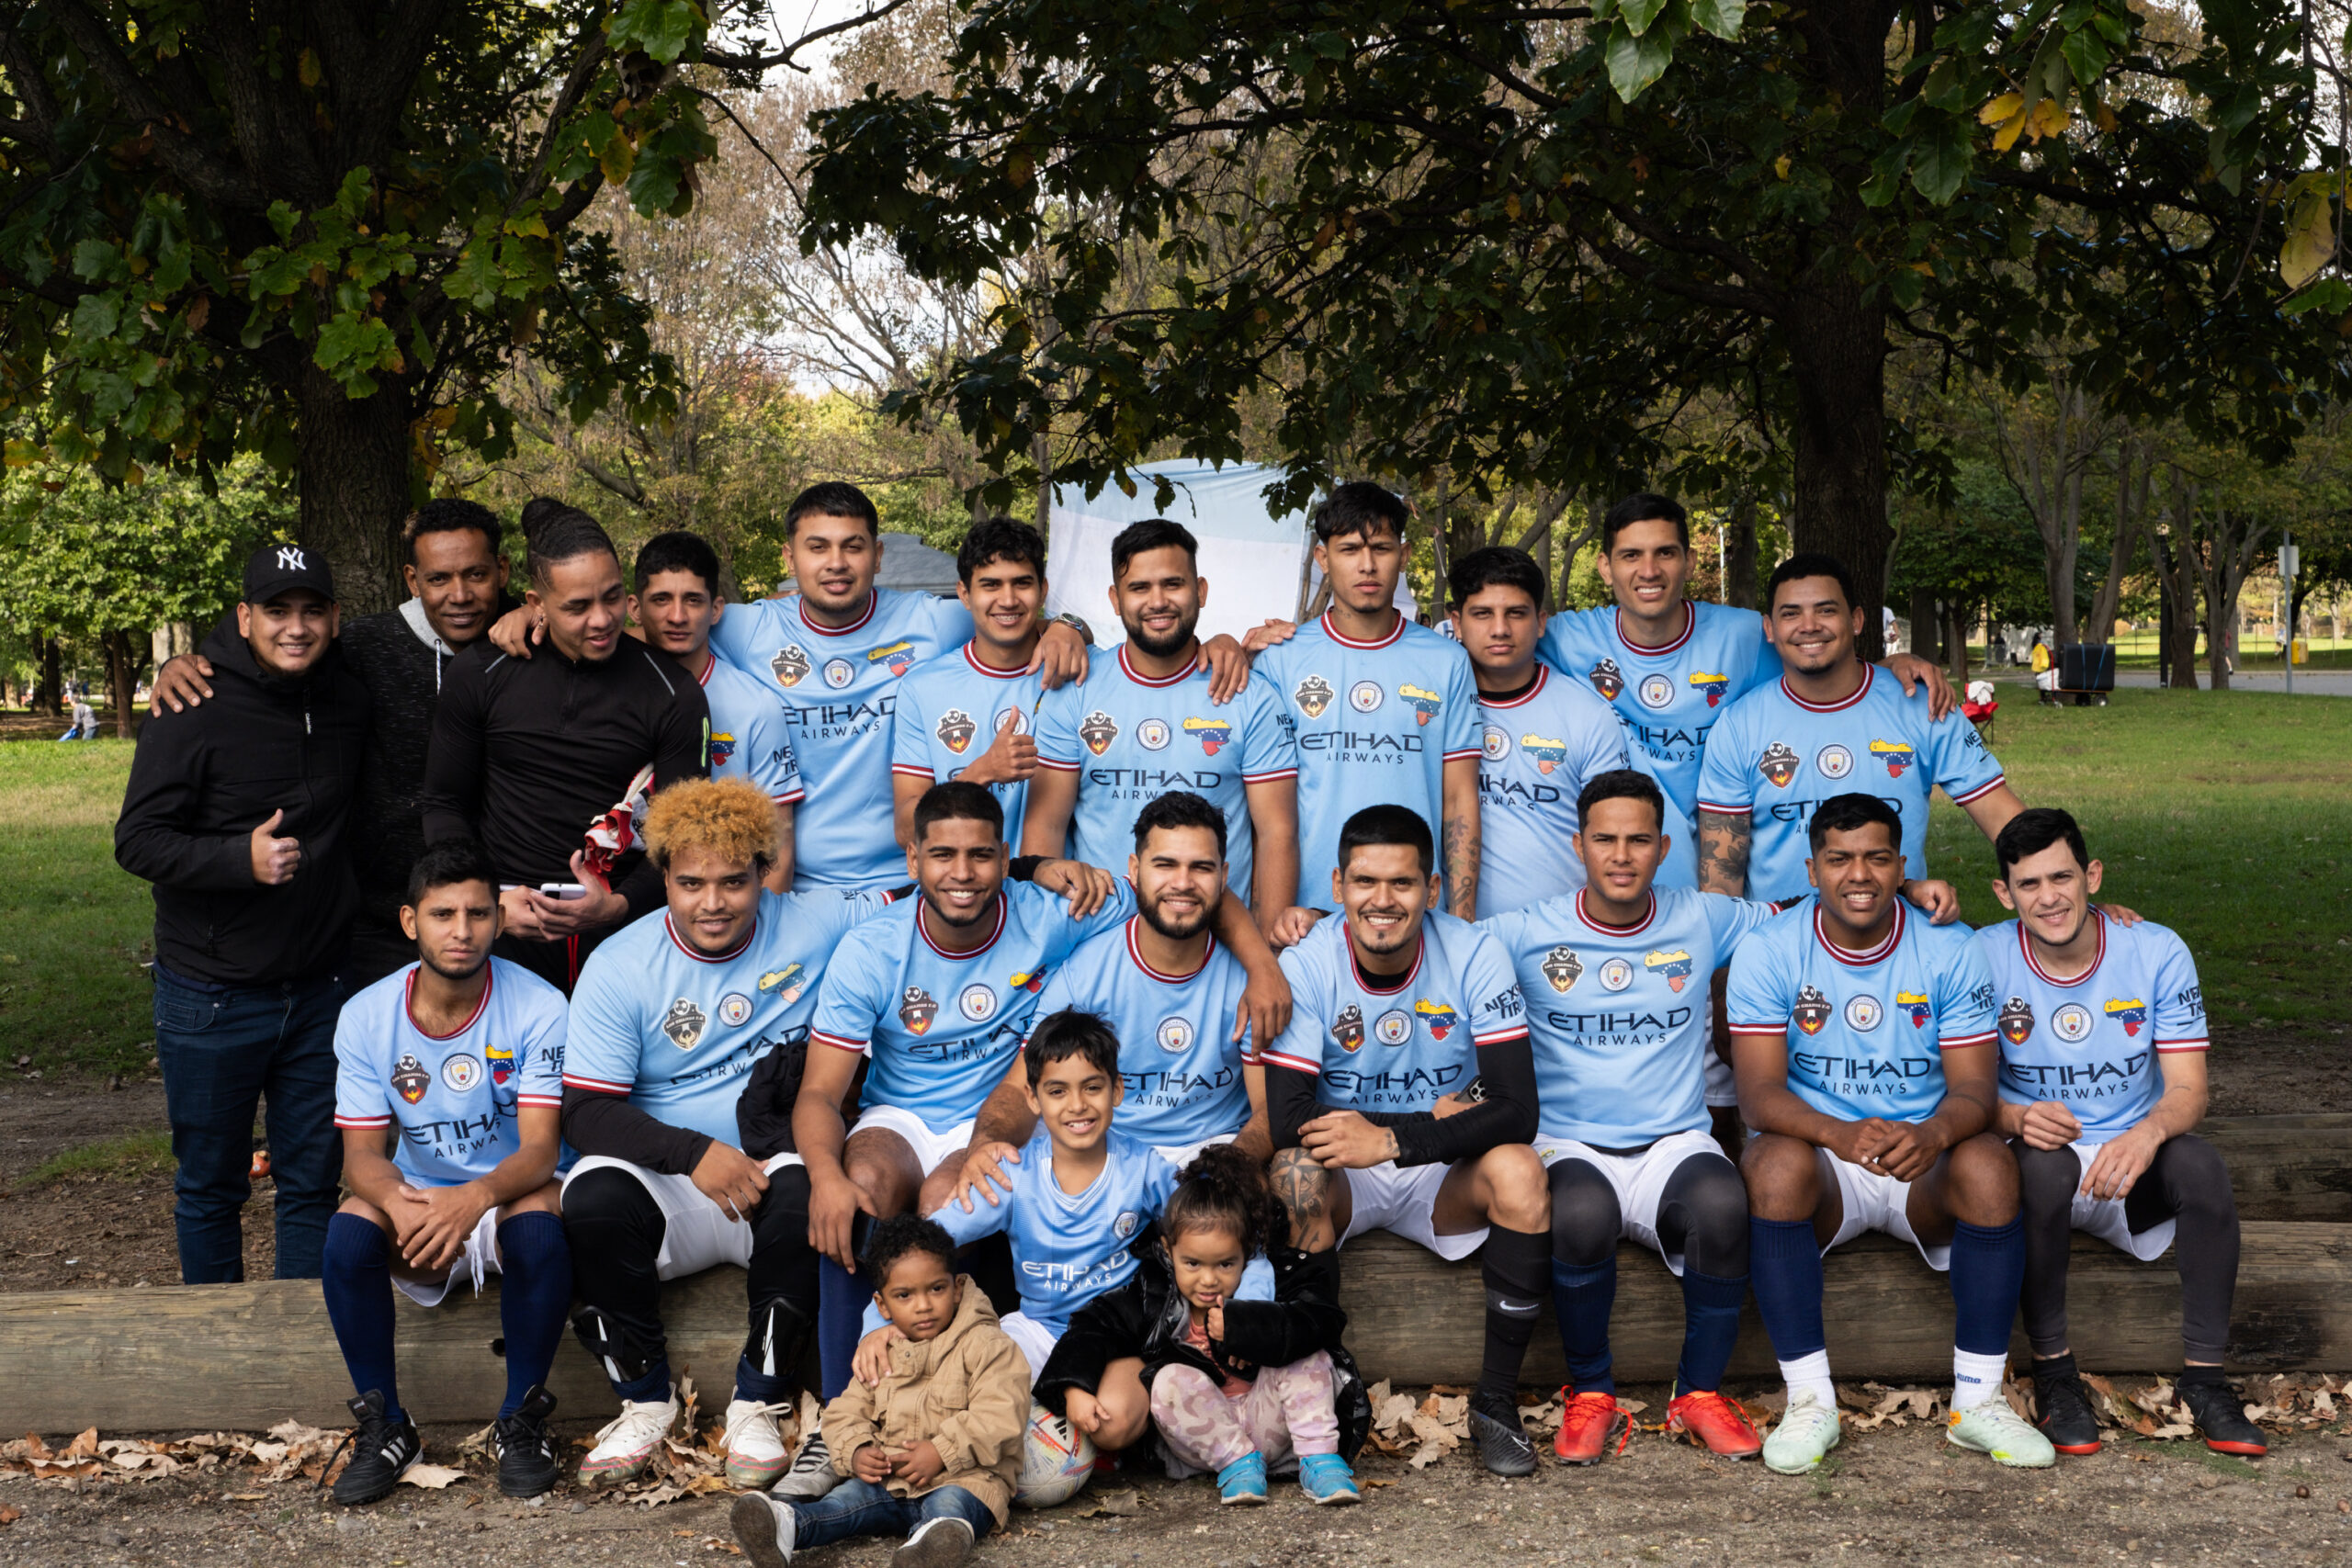 The Los Chamos F.C. poses for a photo on Oct. 15. (Credit: Sofia Mareque) 